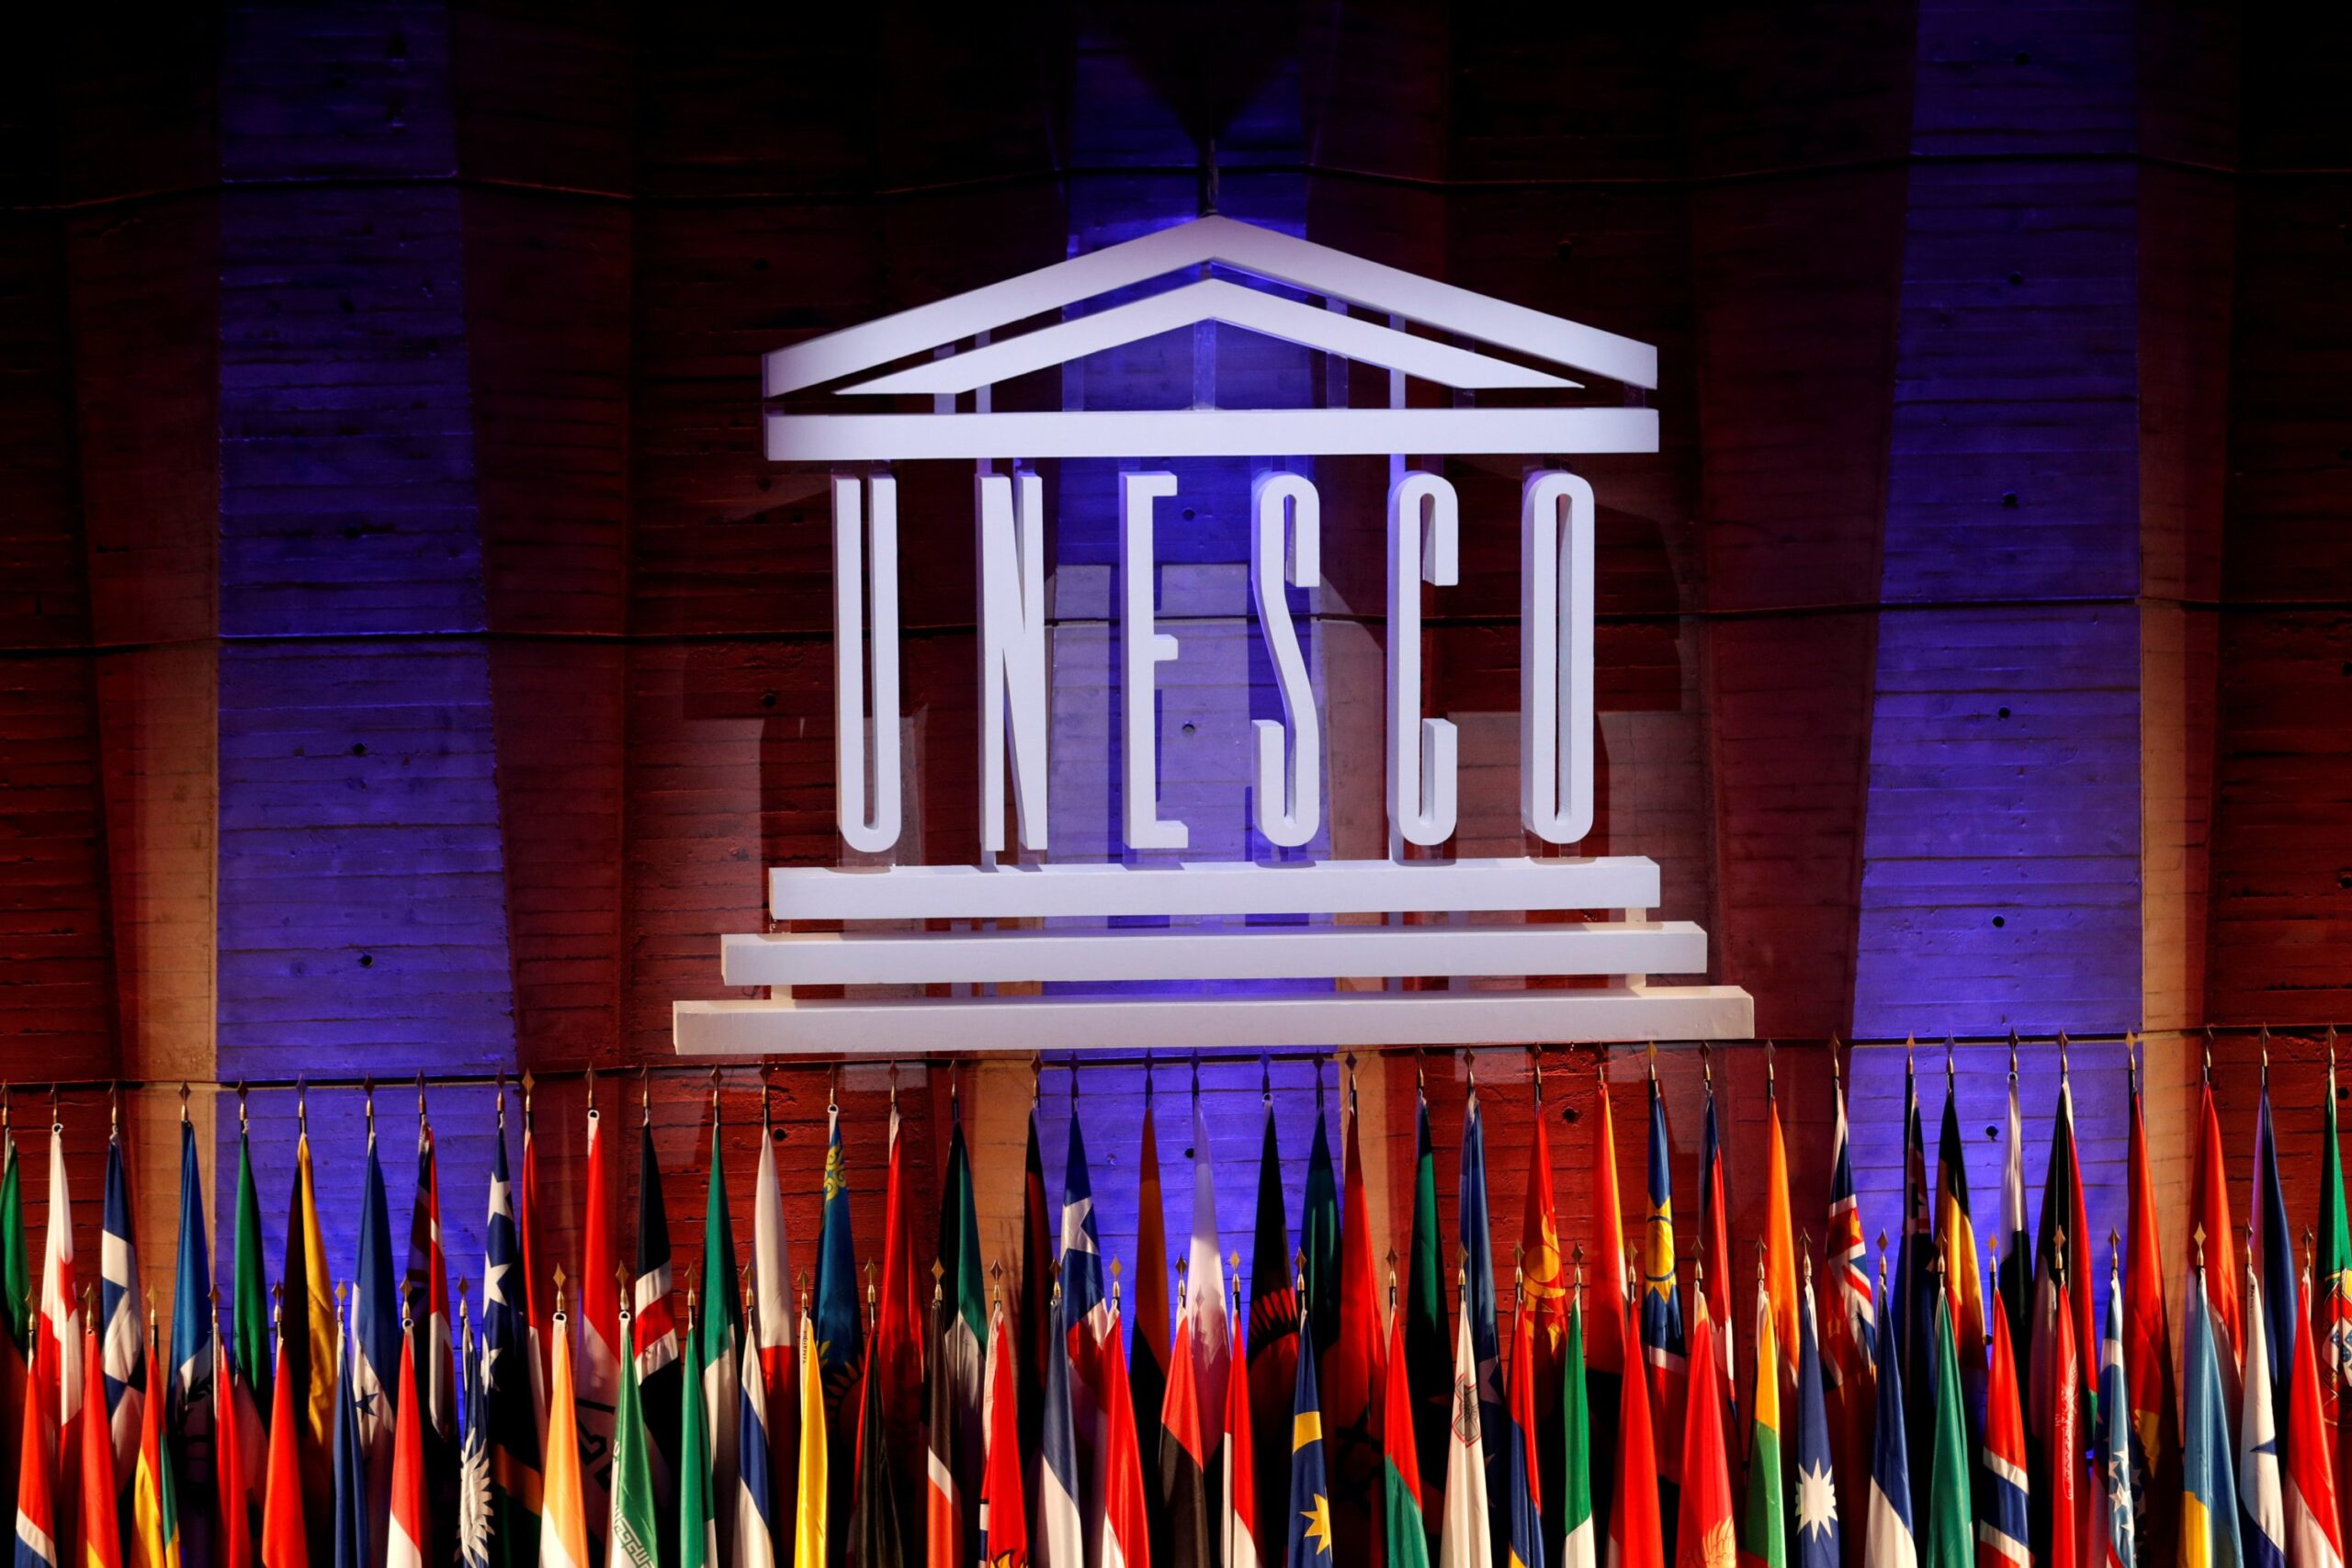 Digital culture fails to pay artists, says new UNESCO report